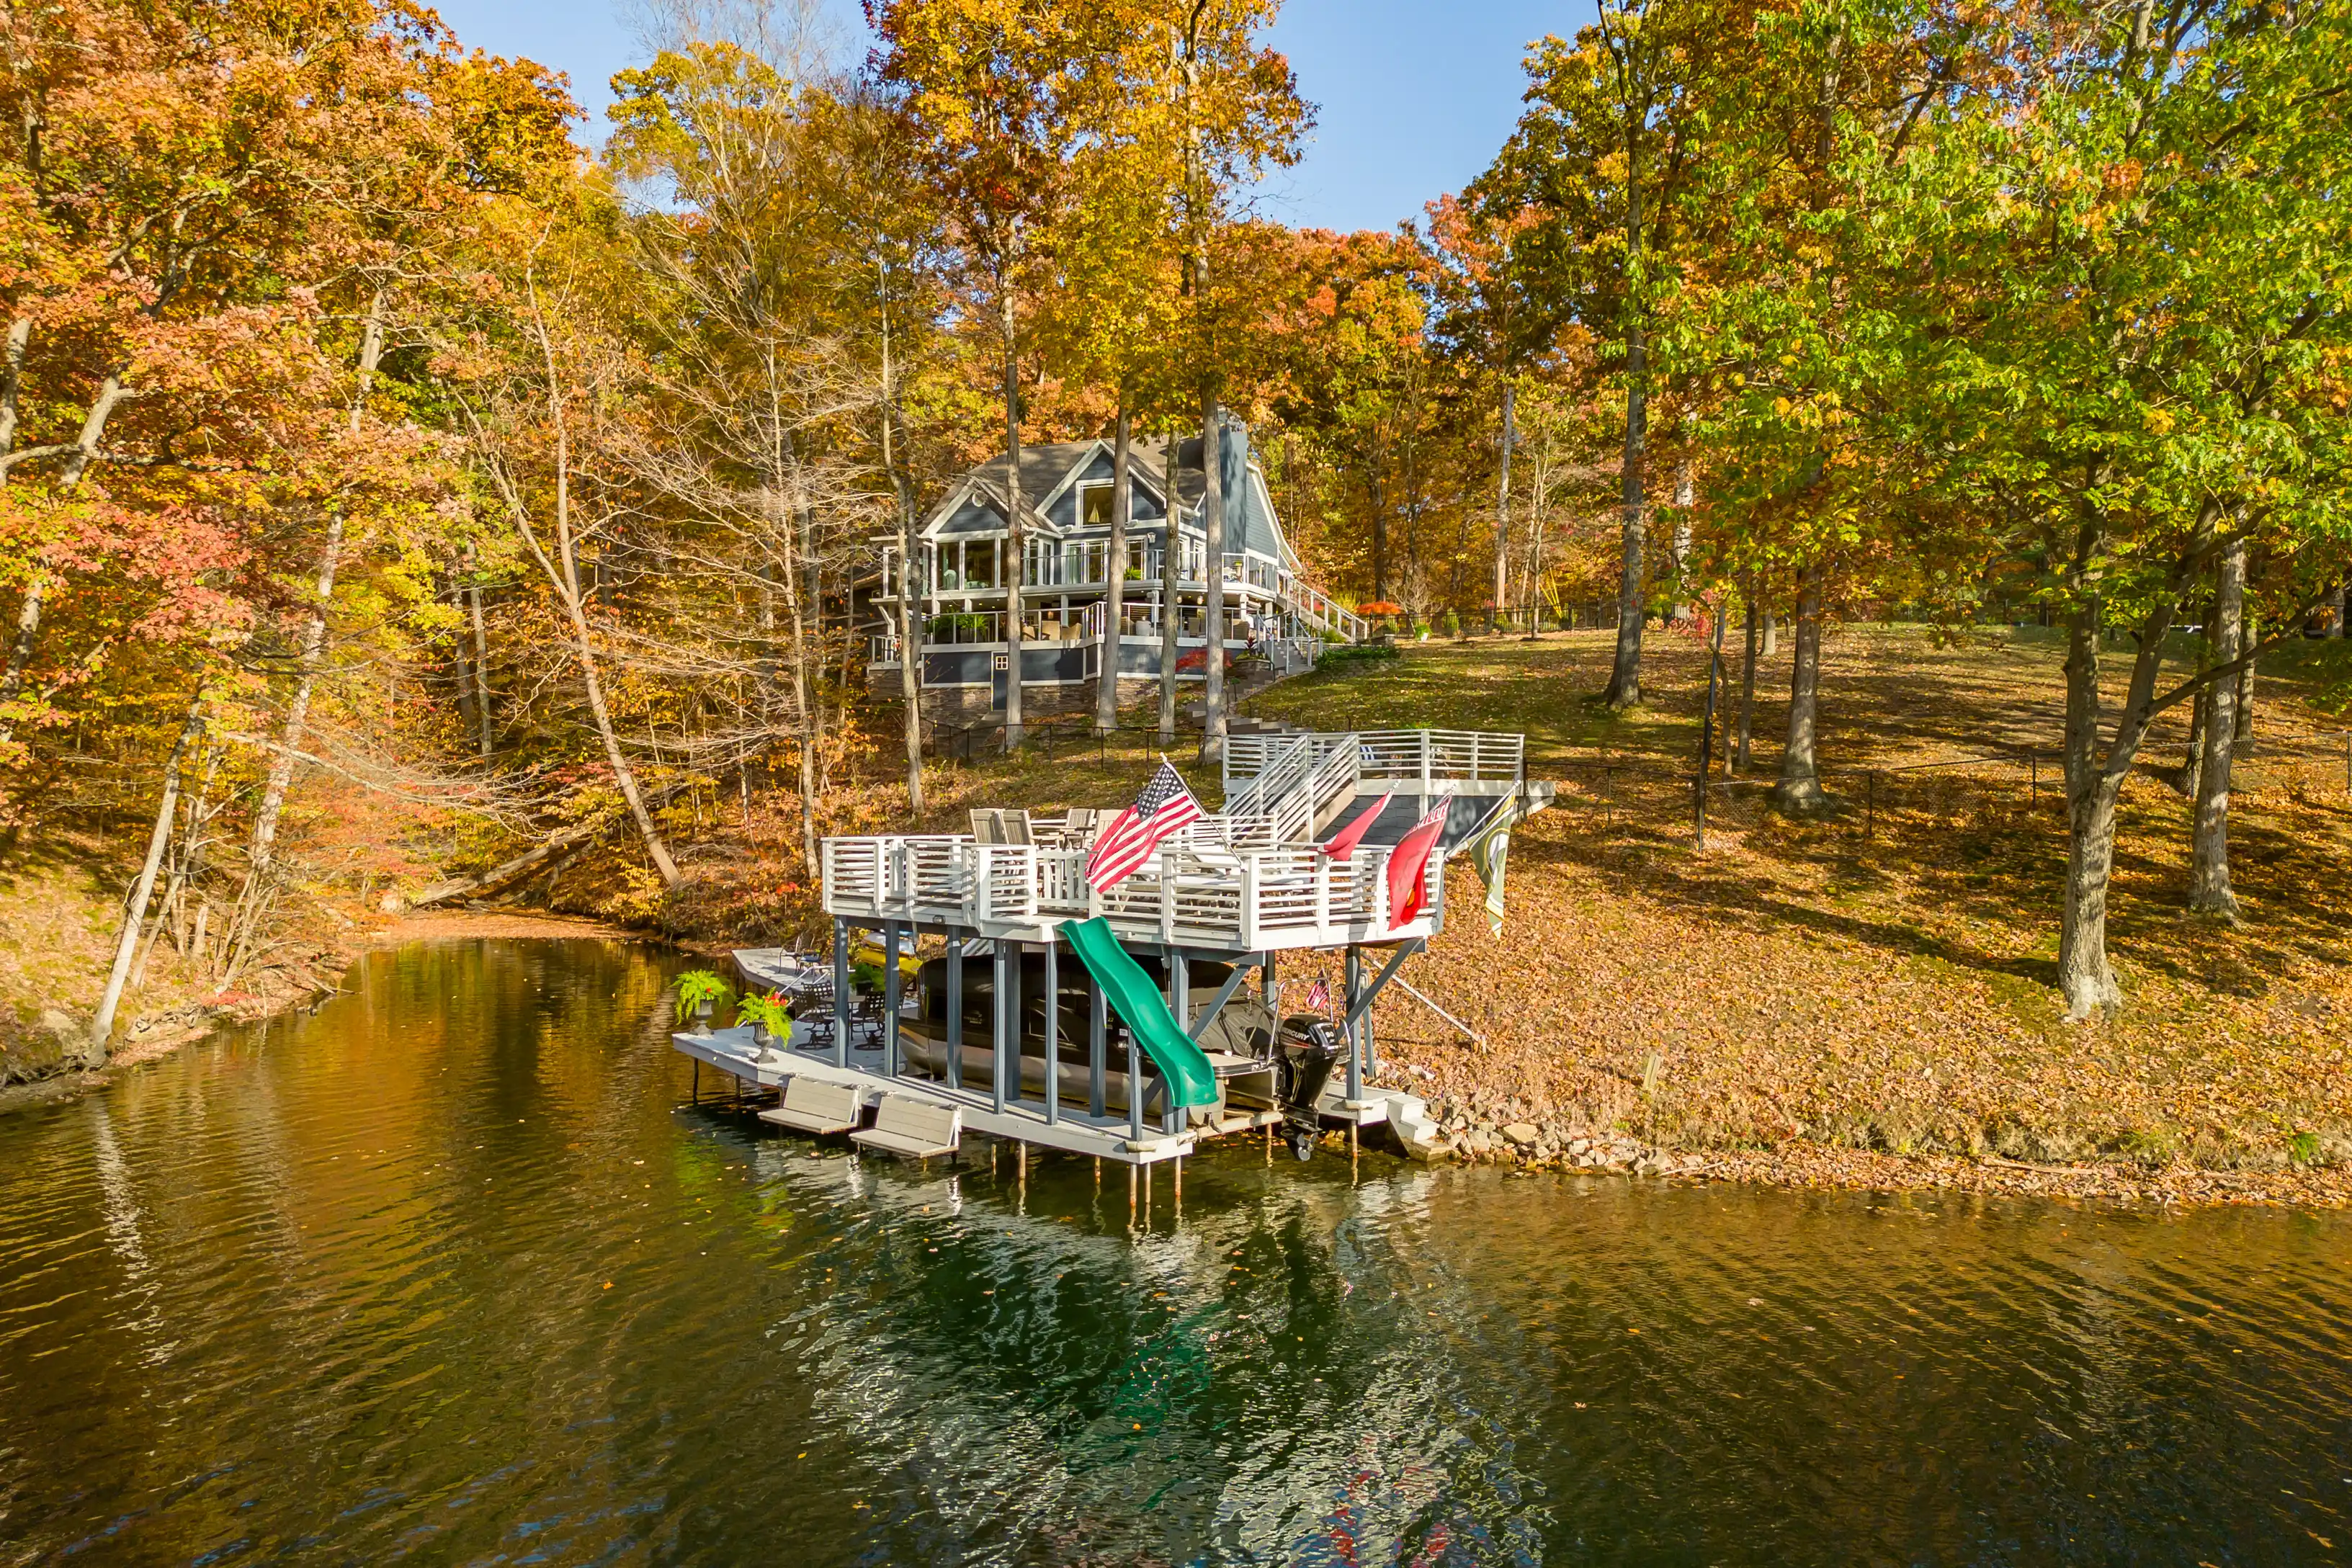 A lakeside house surrounded by autumn-colored trees with a dock featuring lounge chairs, American flags, and a green slide.